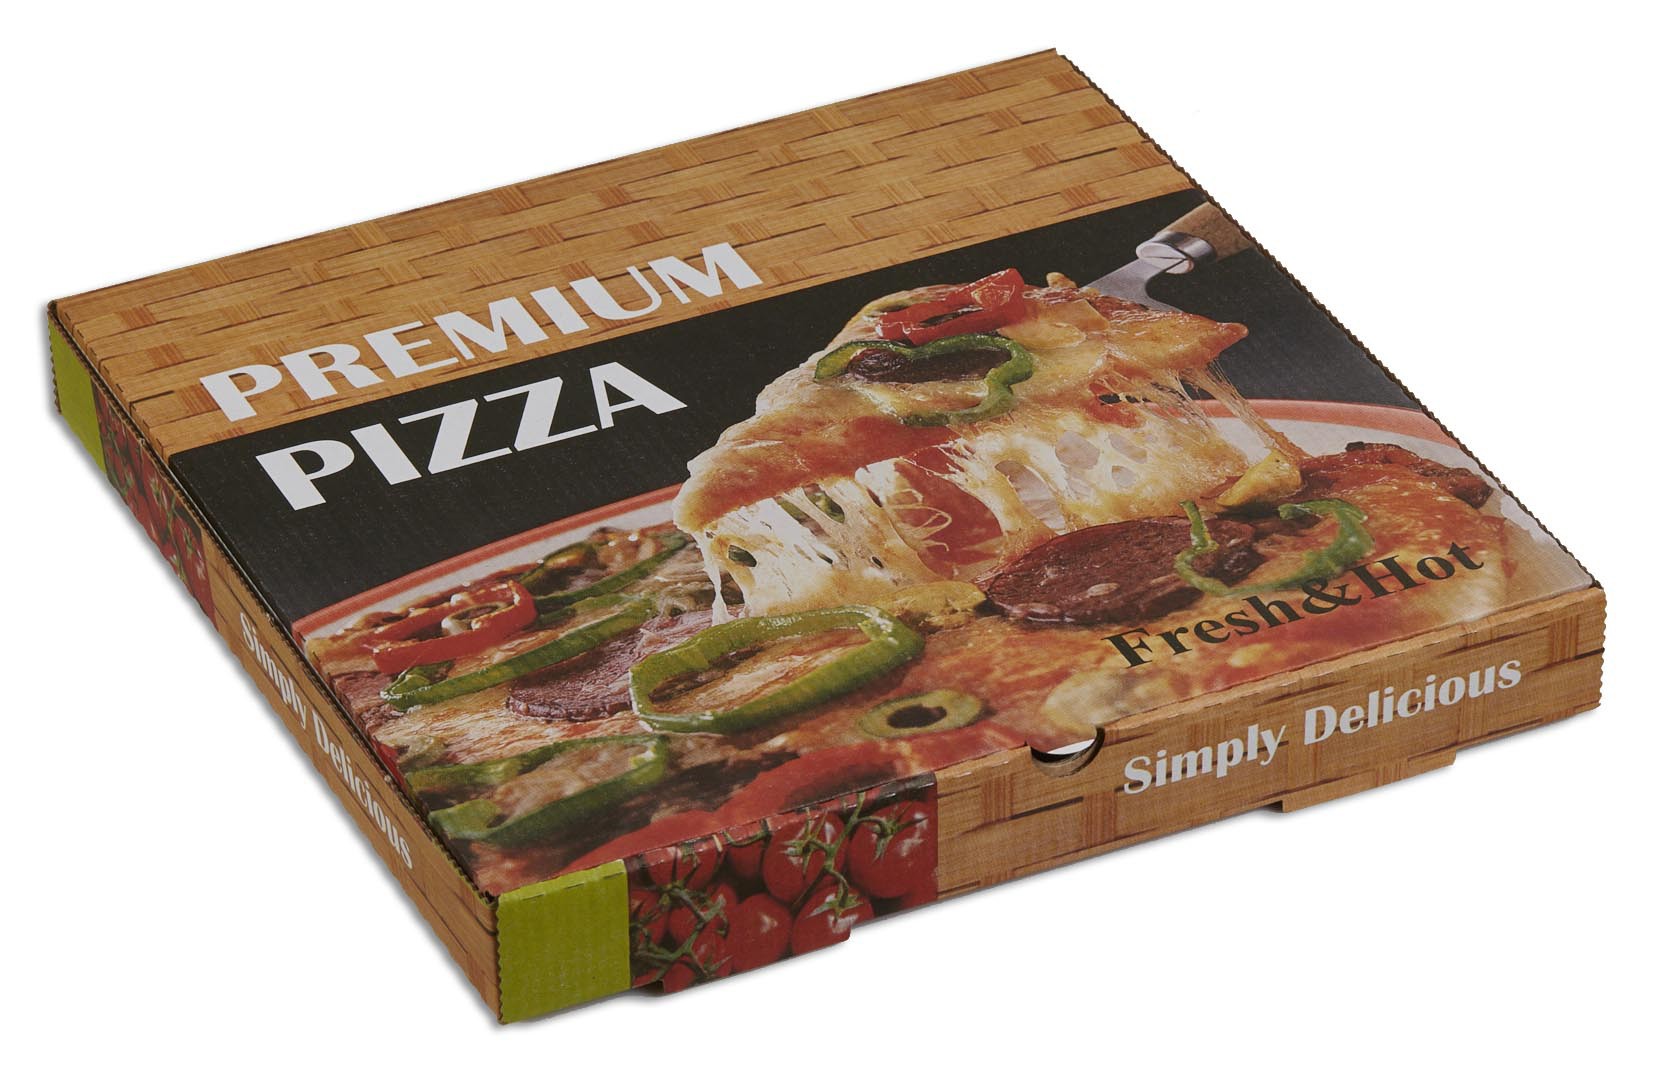 Hot Fresh Pizza Boxes - W Packaging